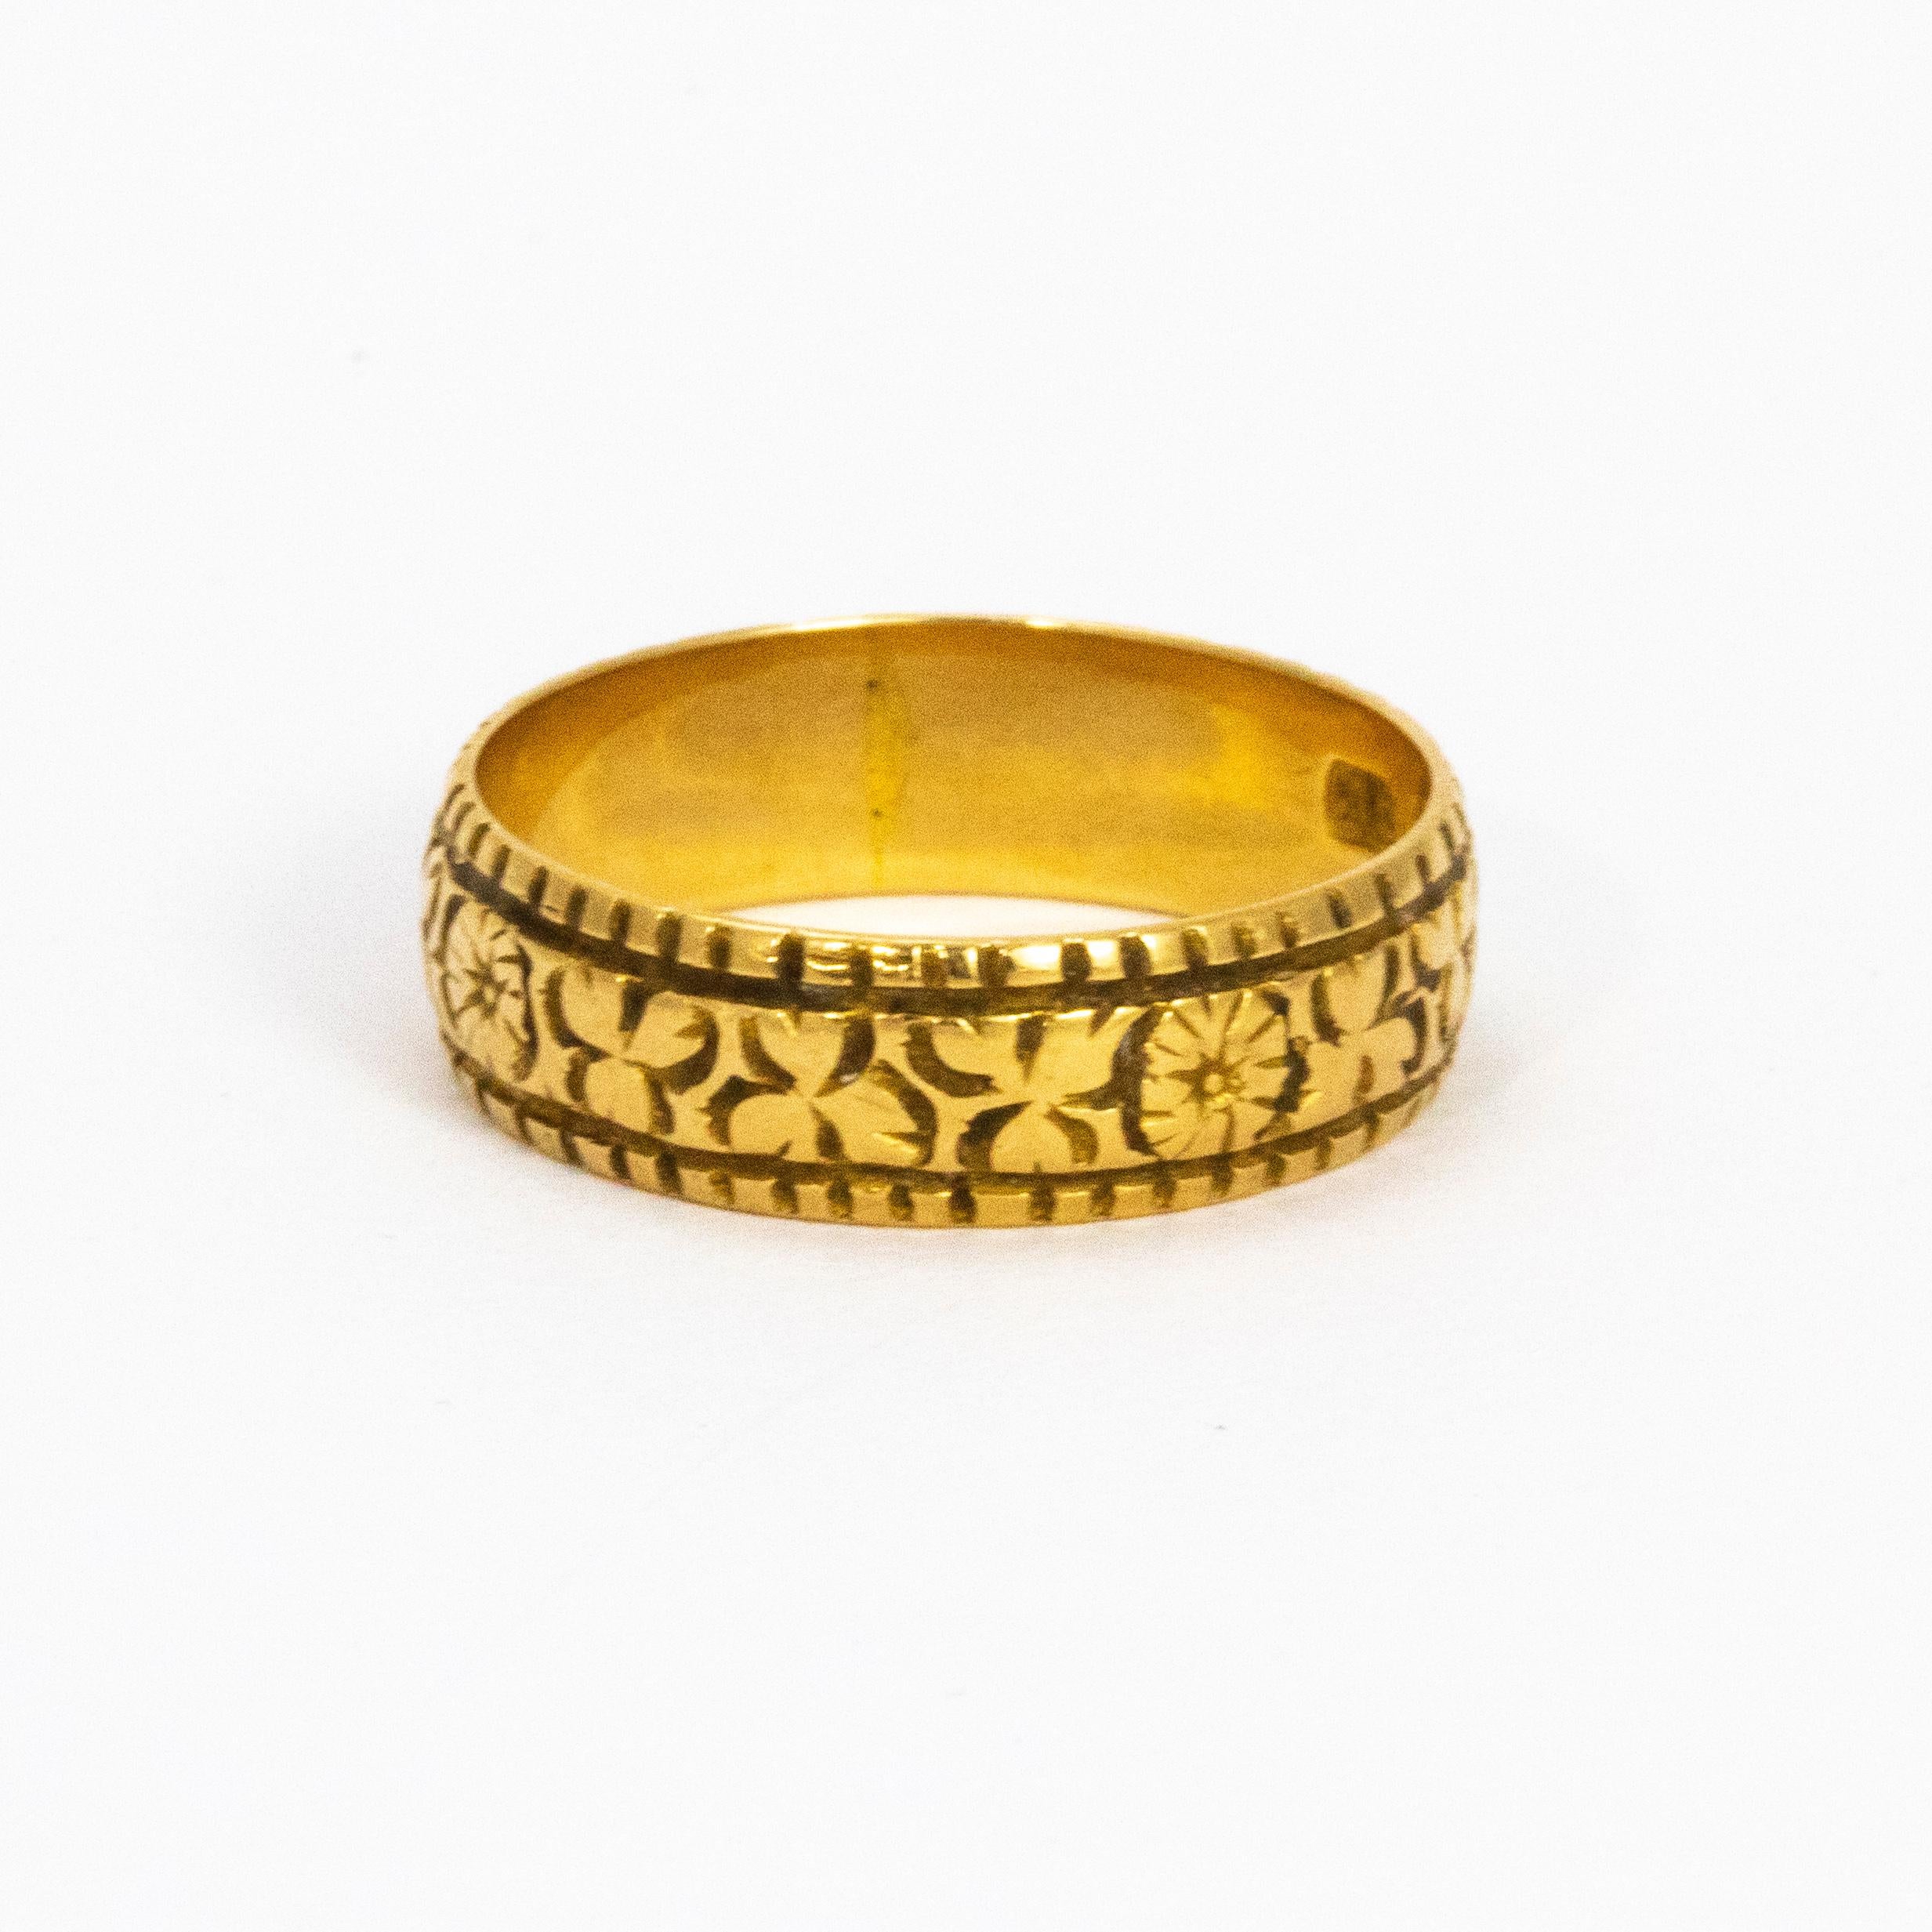 This heavily detailed 18ct gold band is just lovely!

Ring Size: Q 1/2 or 8 1/4